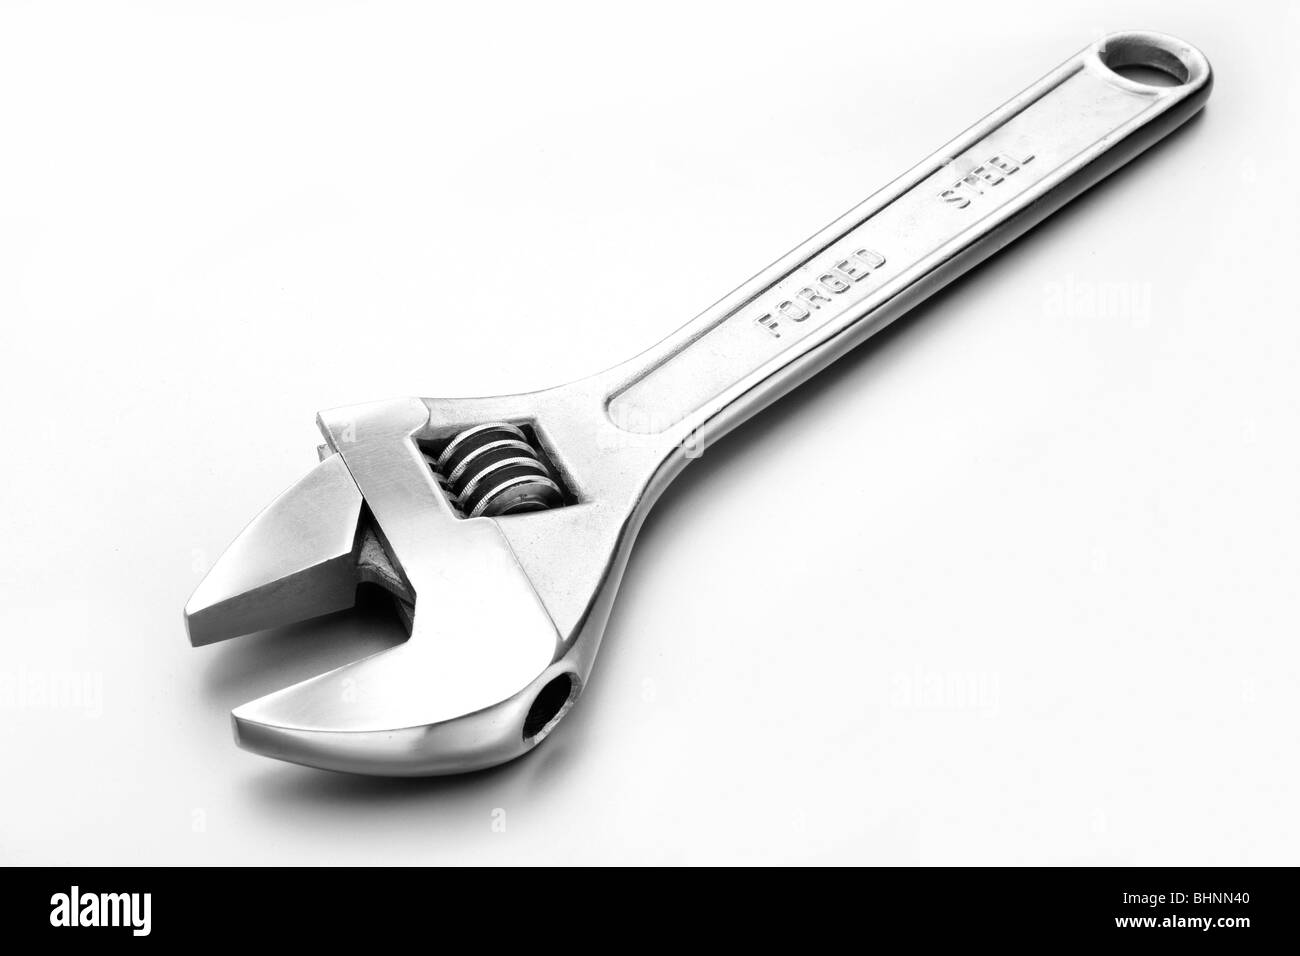 adjustable wrench spanner on white background Stock Photo